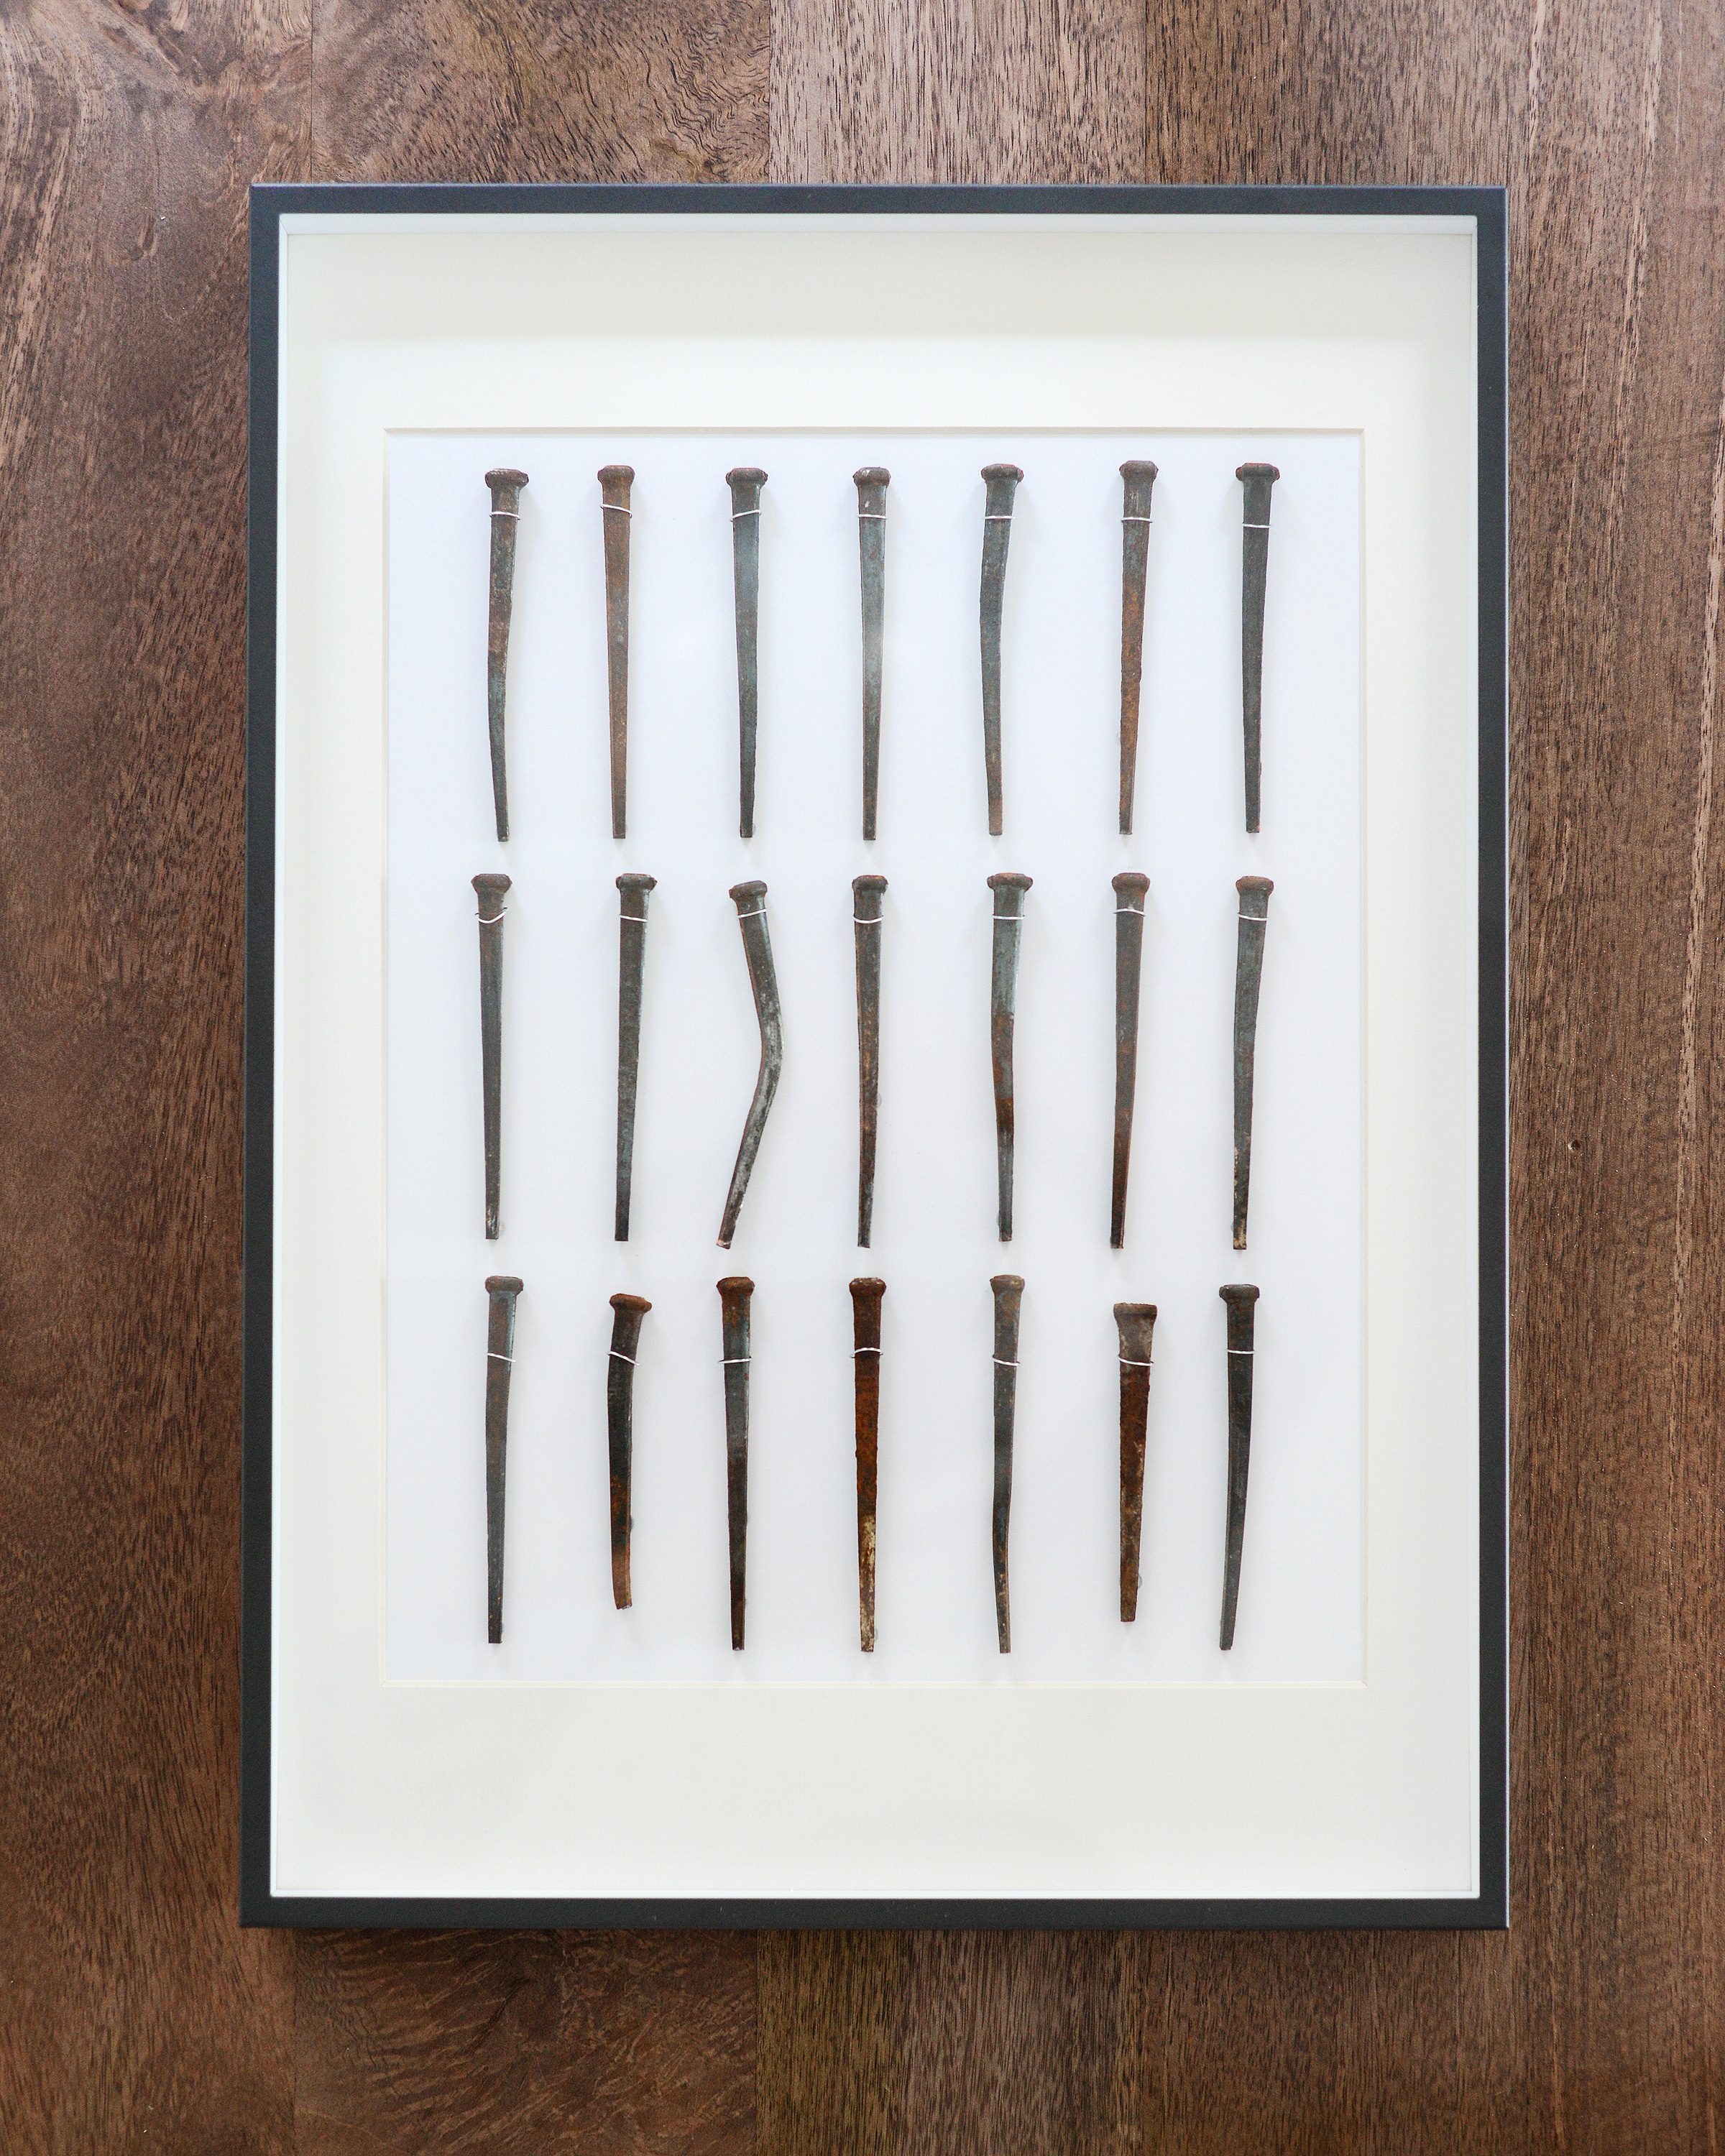 A shadow box frame using old nails from a home renovation | via Yellow Brick Home